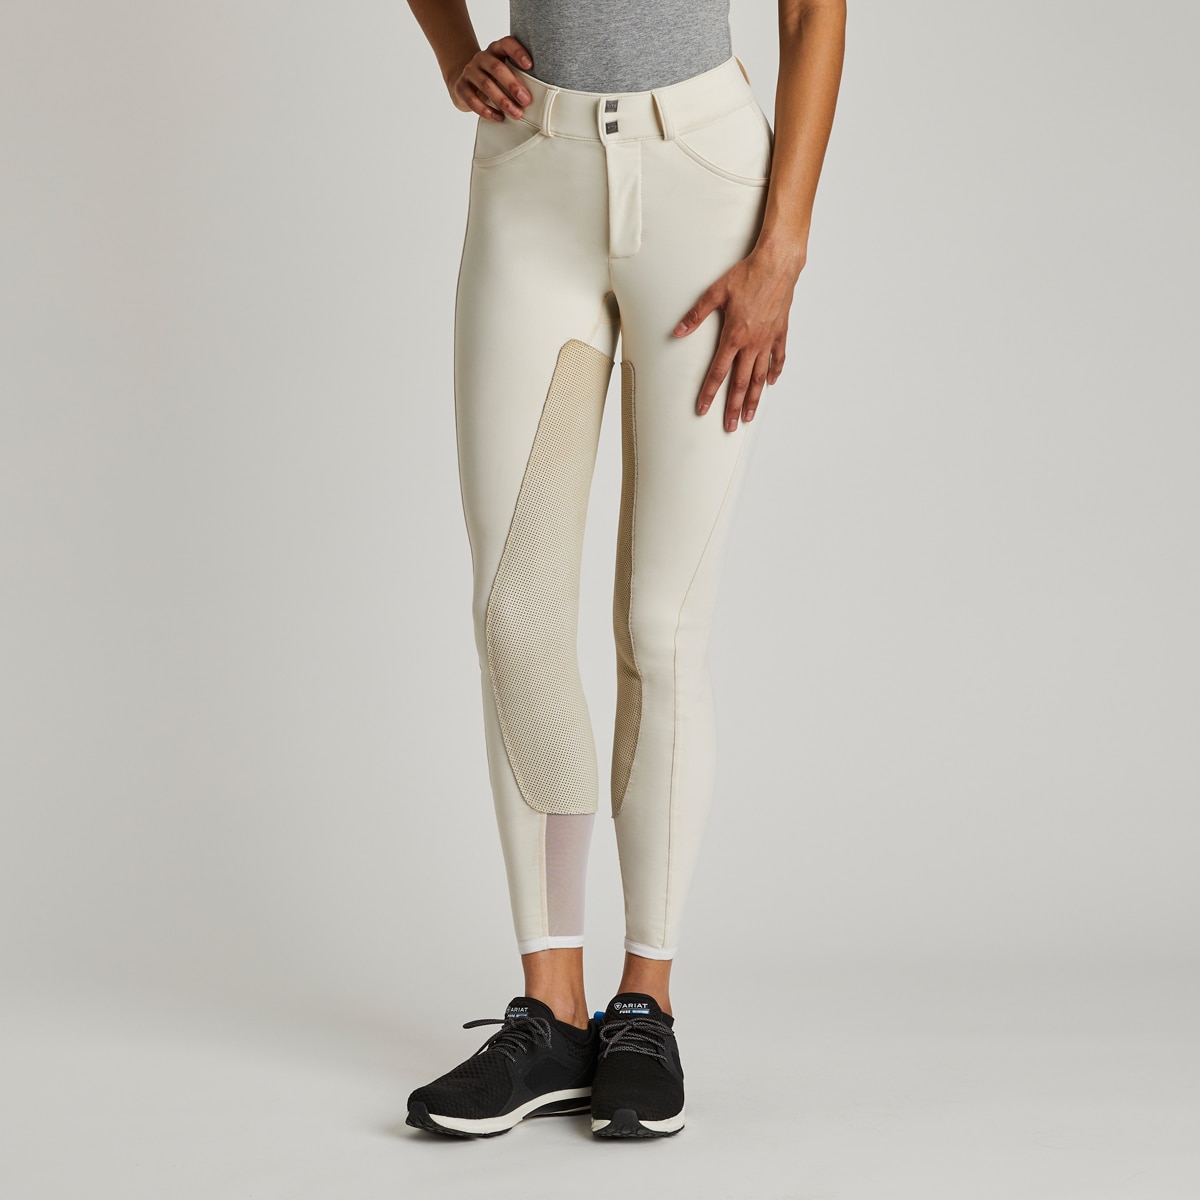 FITS Performax Pull On Full Seat Breeches – Euro Equestrian